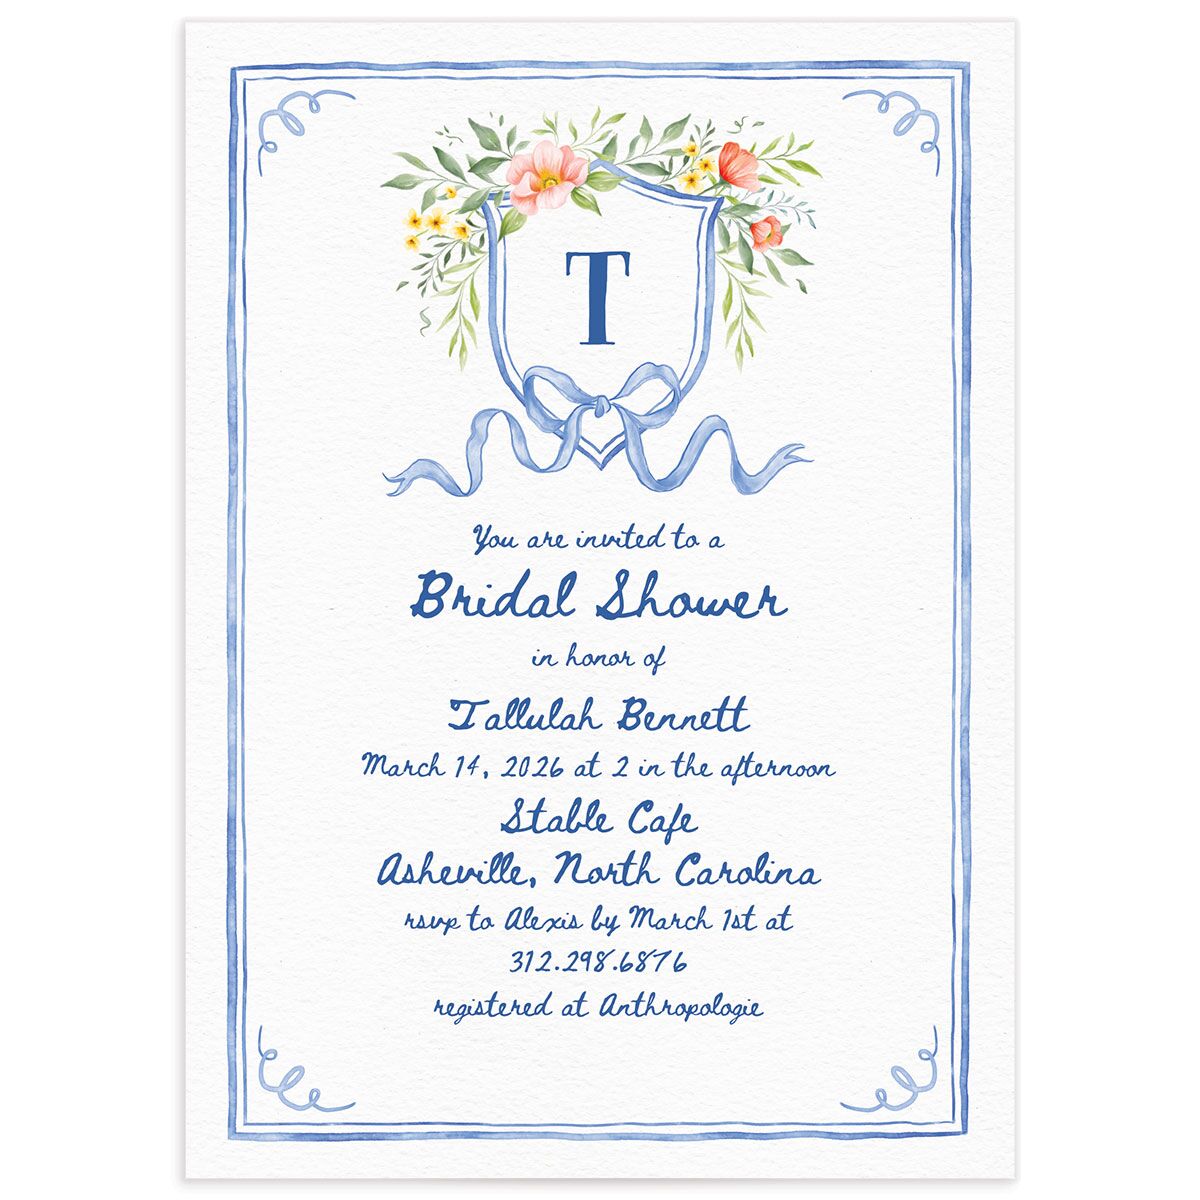 Countryside Crest Bridal Shower Invitations